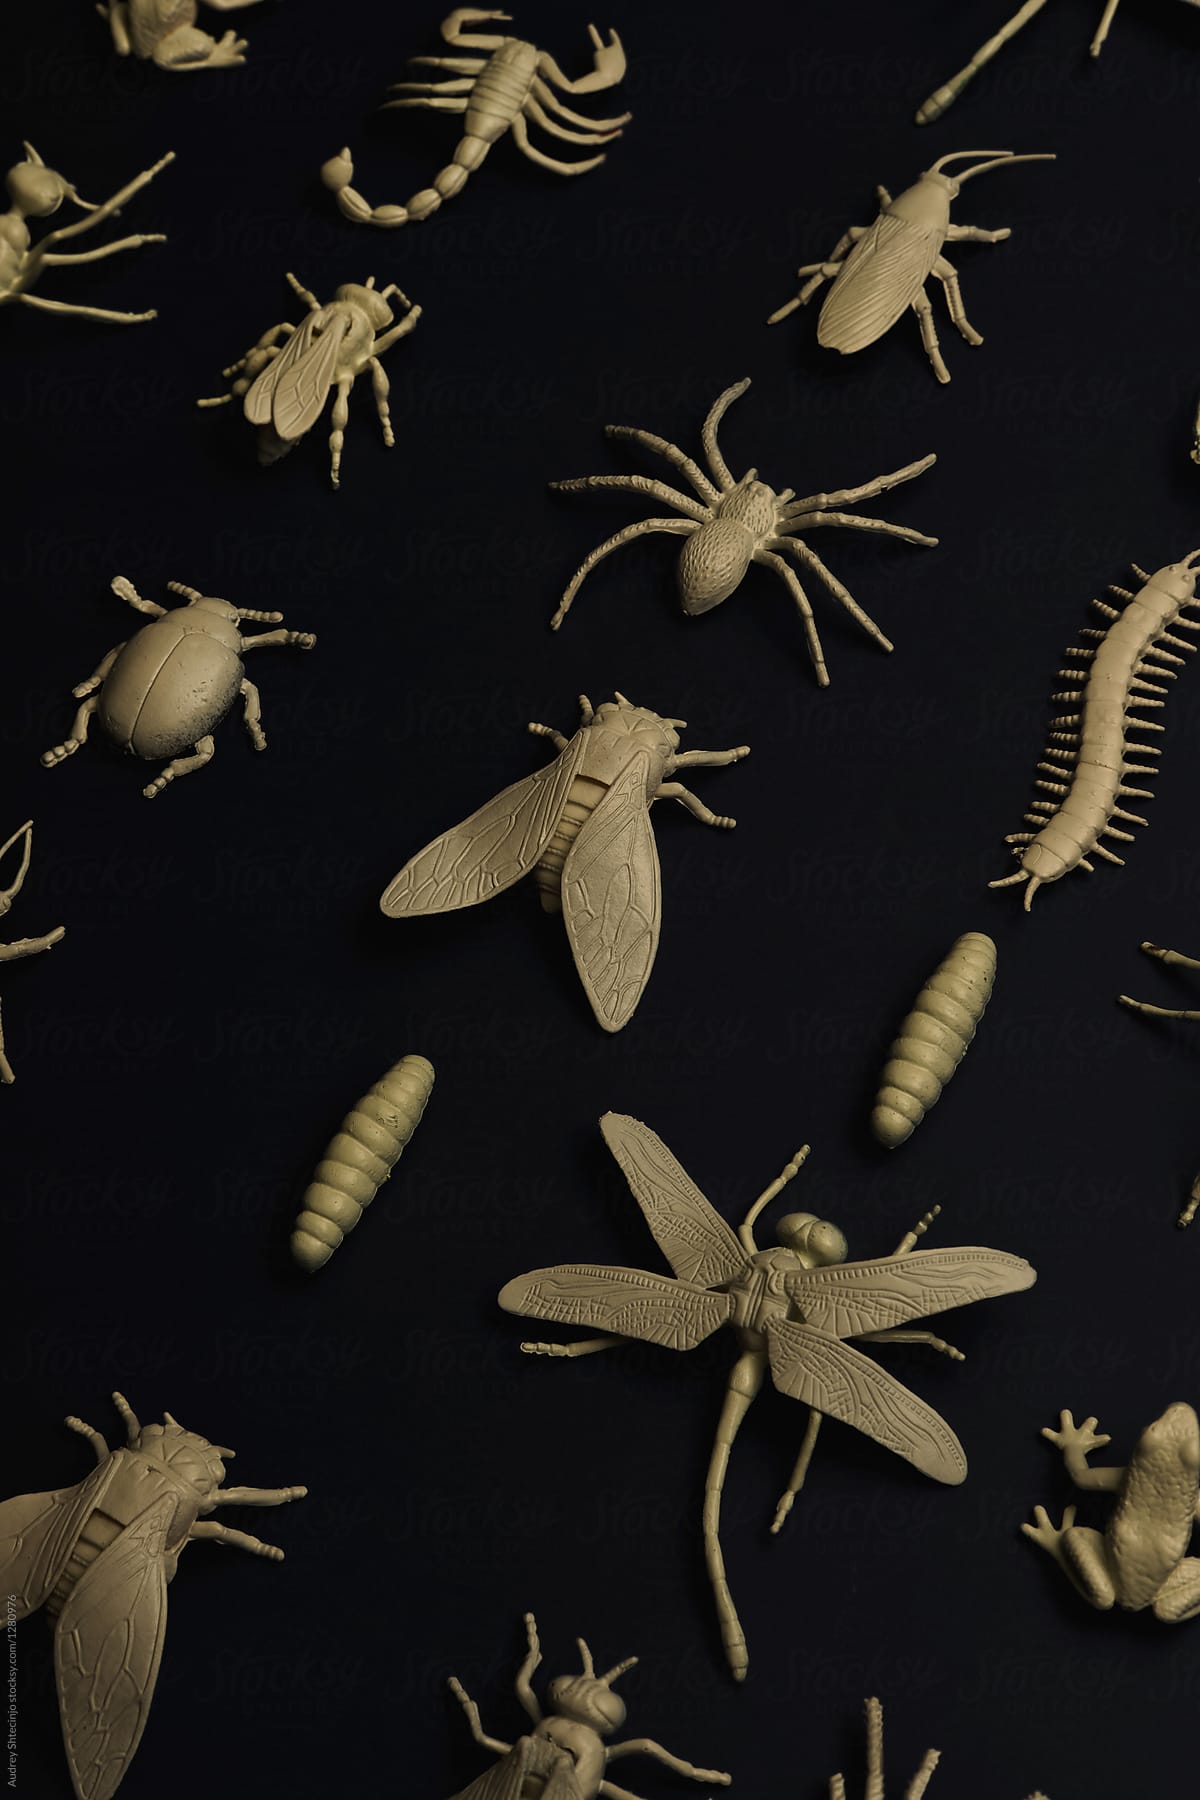 Insectorium/collection of bugs/insects.